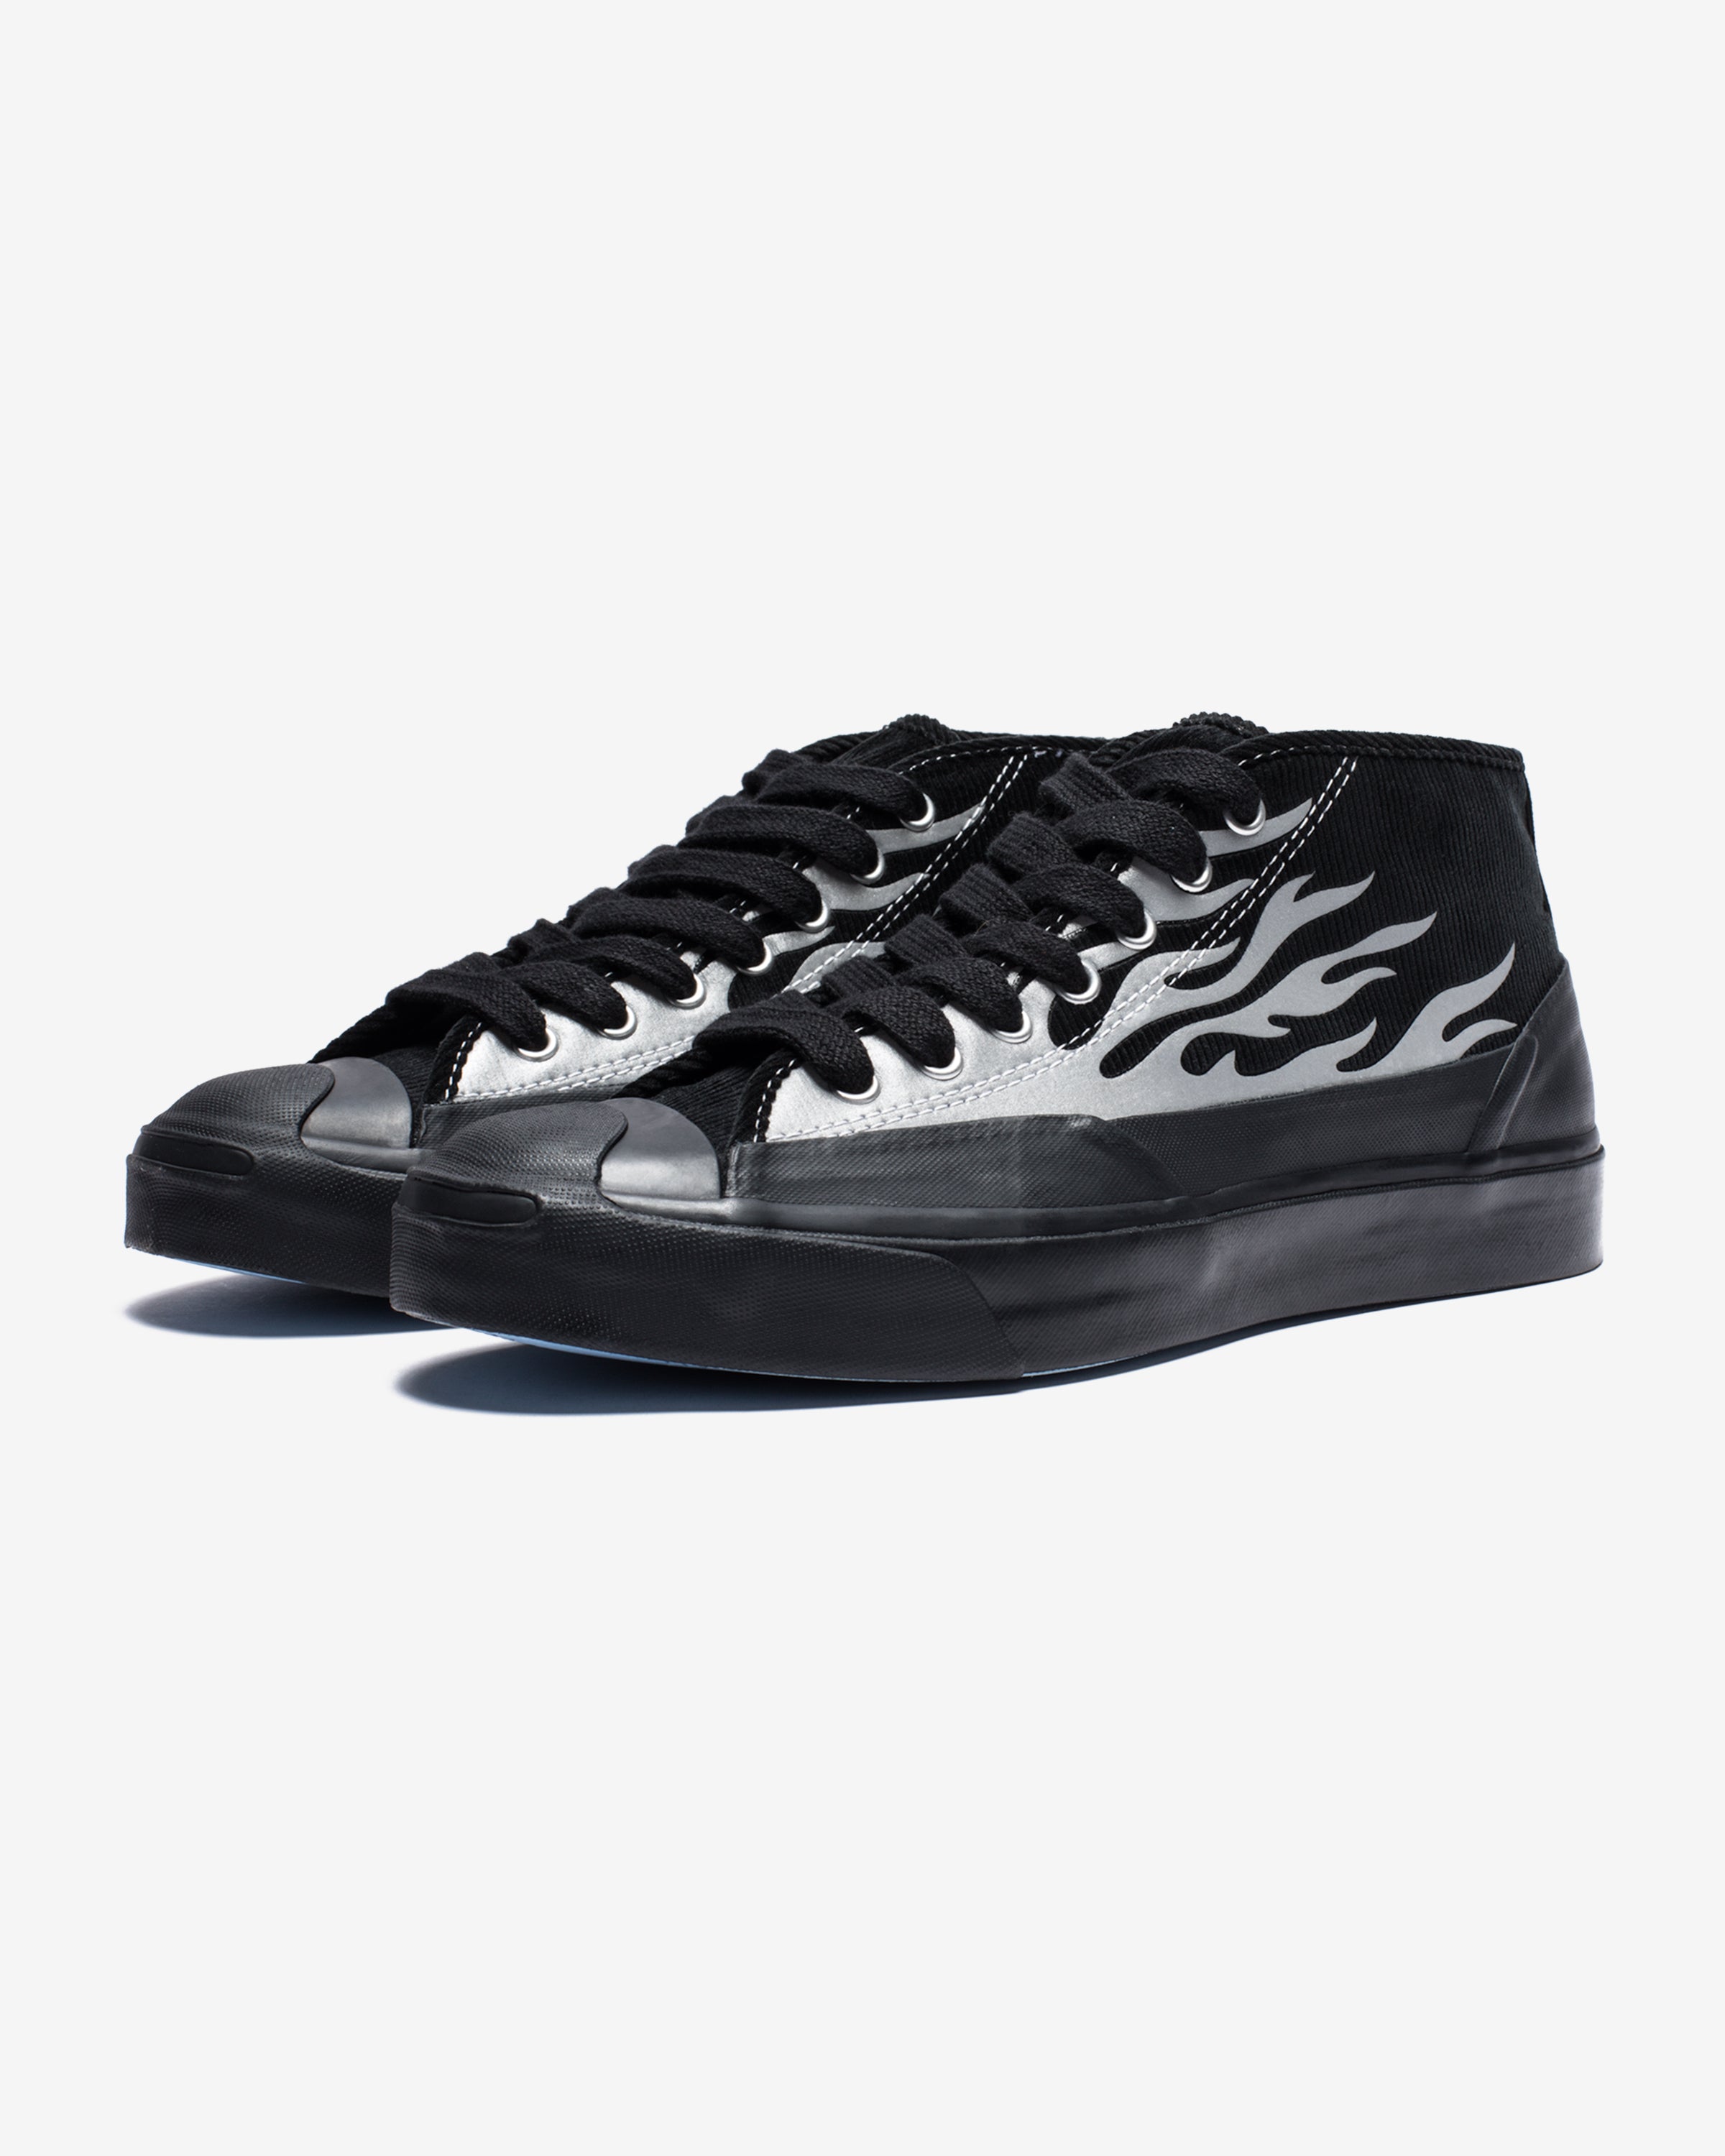 CONVERSE X ASAP NAST JACK PURCELL CHUKKA MID - BLACK/SILVER – Undefeated